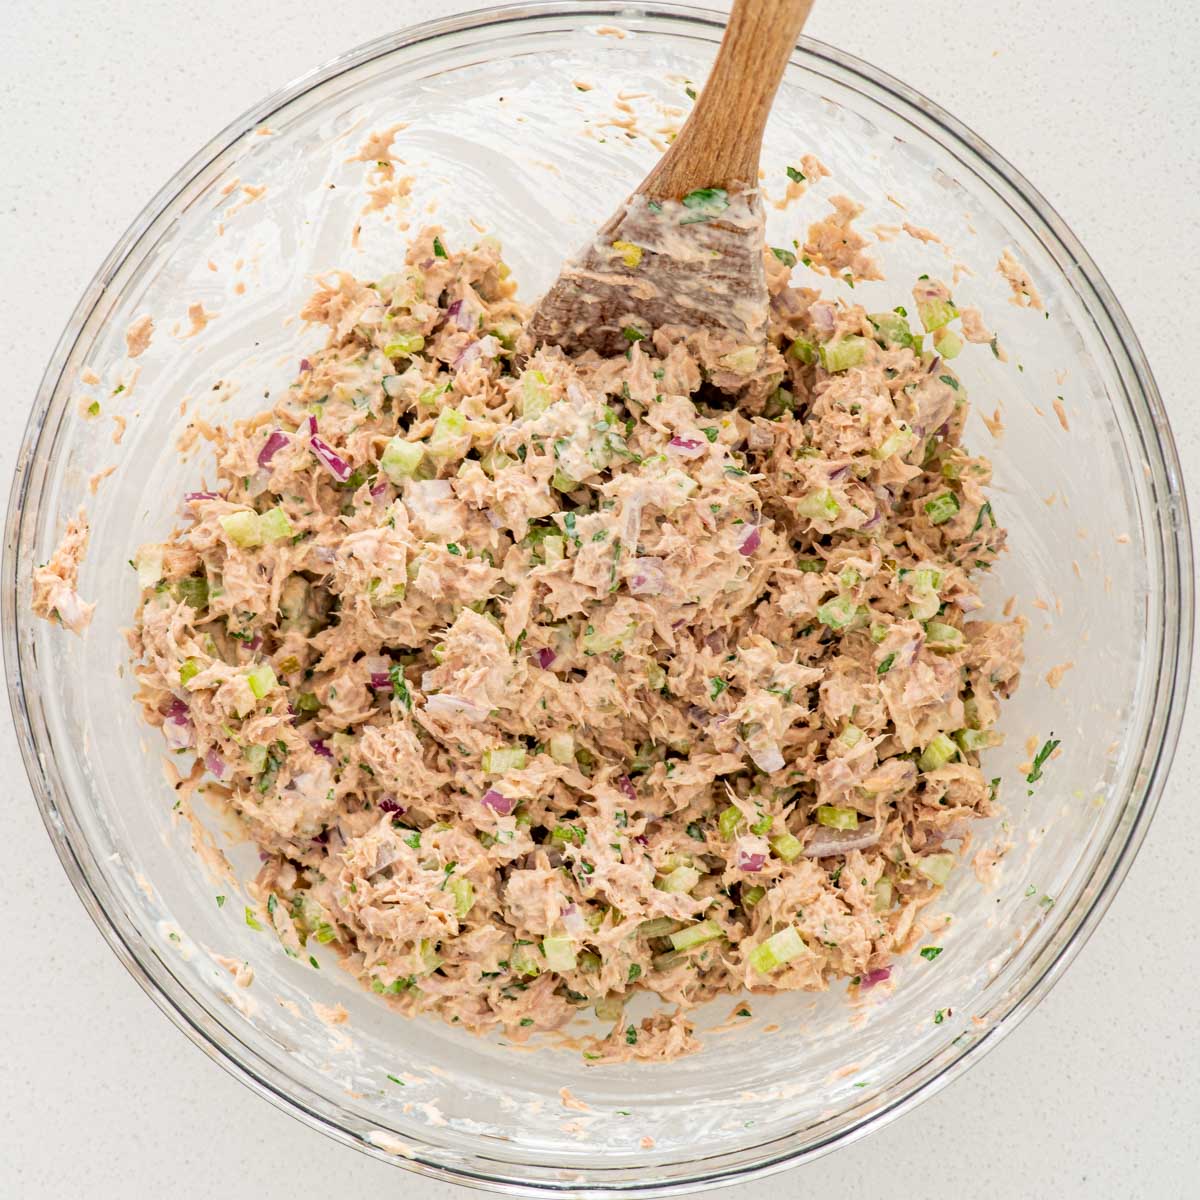 tuna salad in a glass bowl with a wooden mixing spoon.